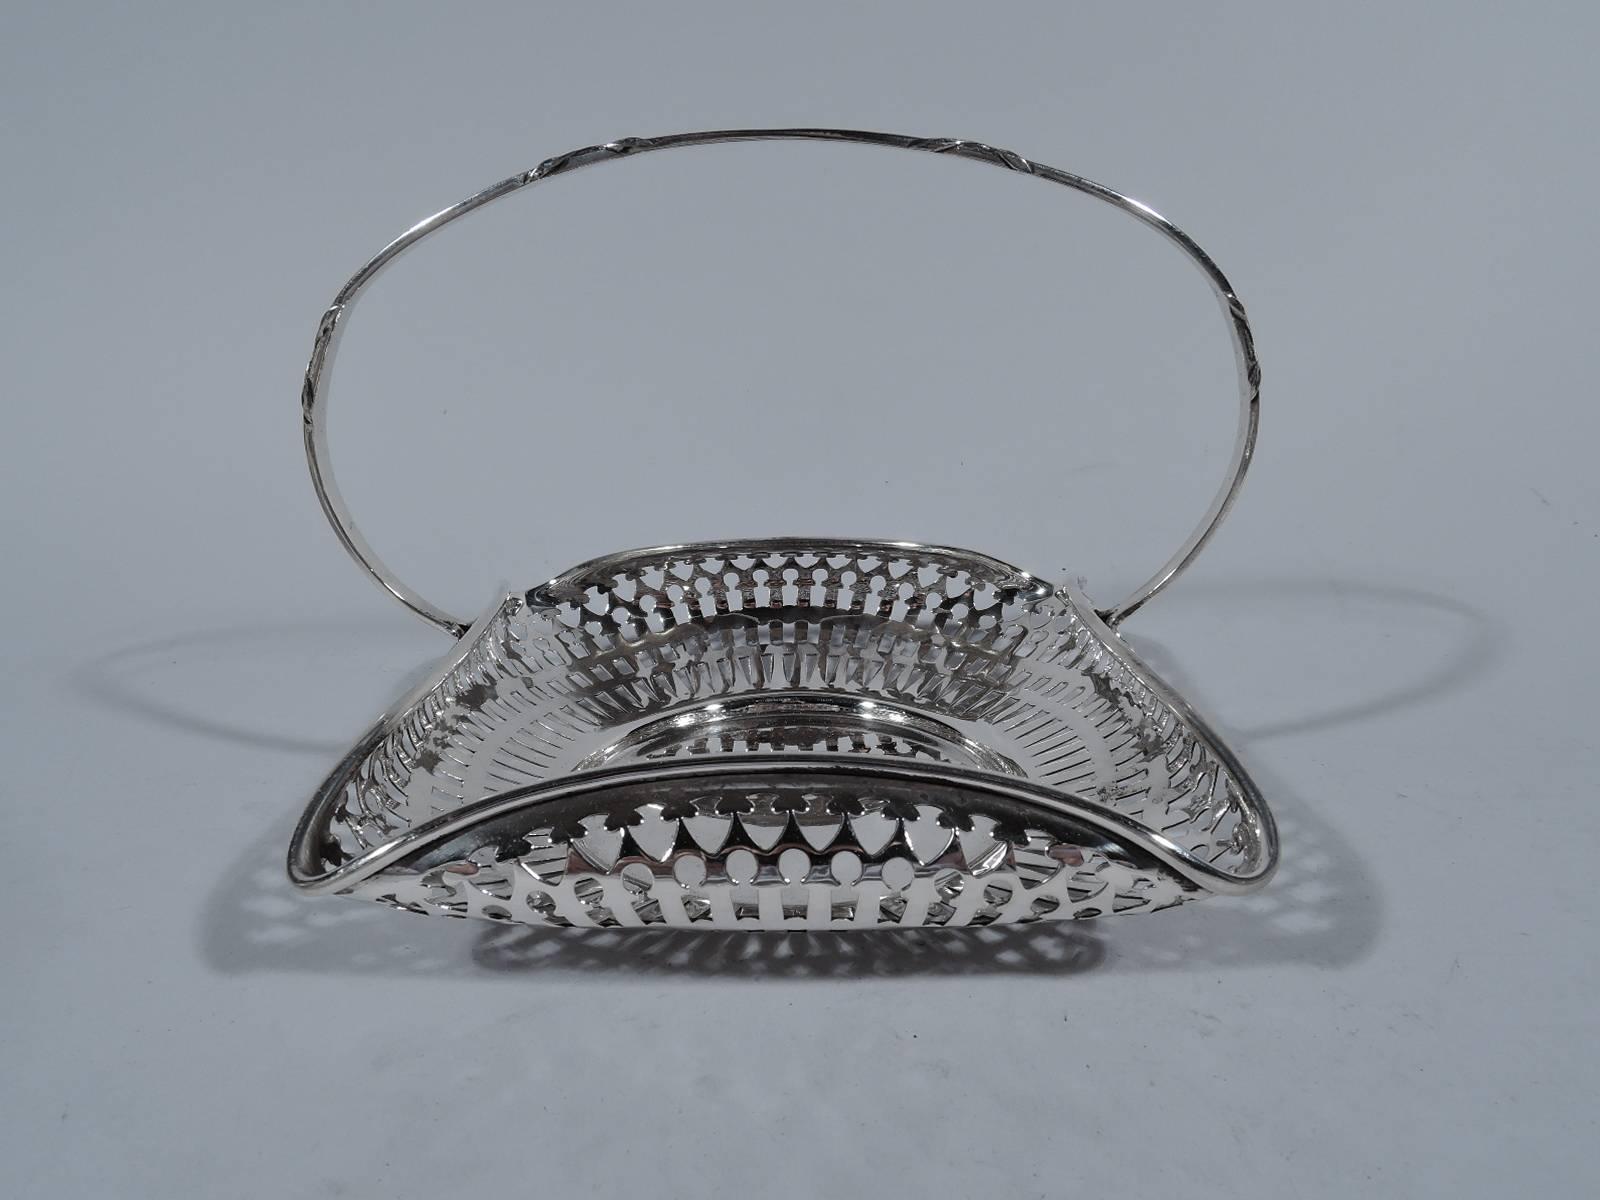 Edwardian sterling silver basket. Made by Gorham in Providence in 1916. Solid circular well and 4 curved sides with turned-in molded rim. Concentric geometric piercing. Stationary C-scroll reeded handle. Hallmark includes no. A7984 and date symbol.